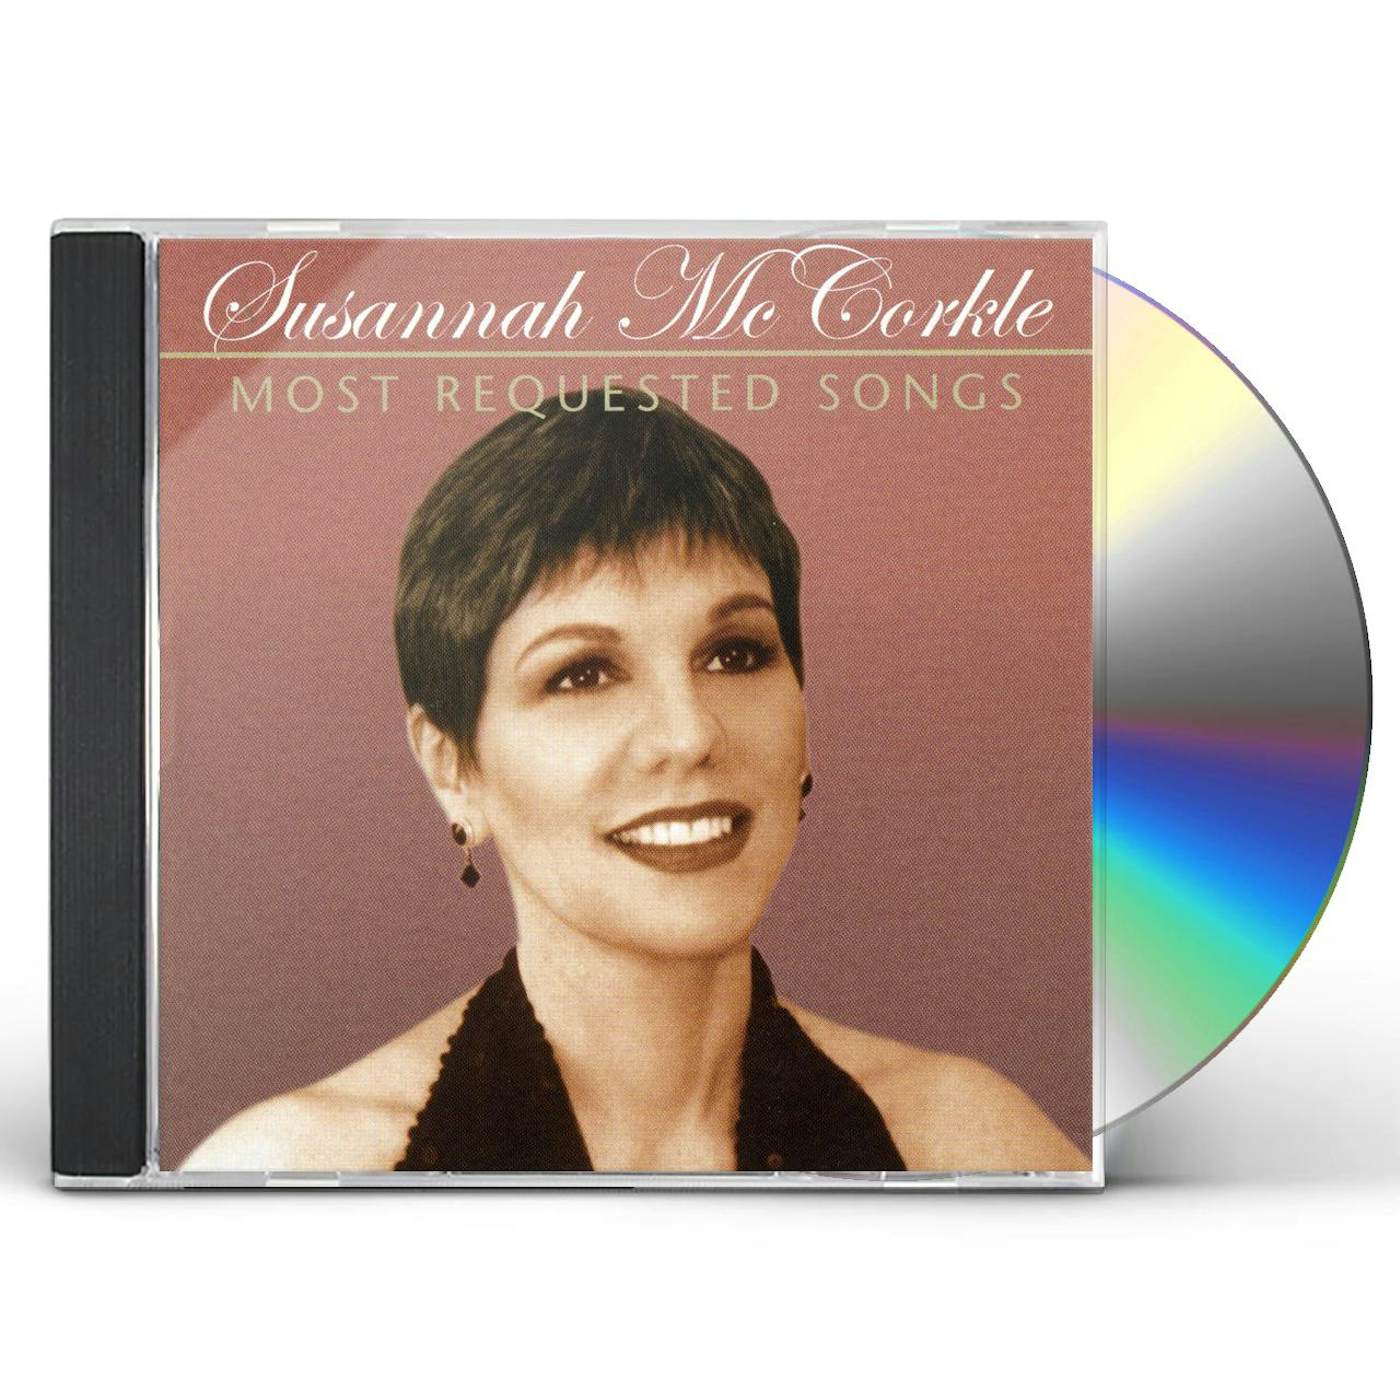 Susannah McCorkle MOST REQUESTED SONGS CD